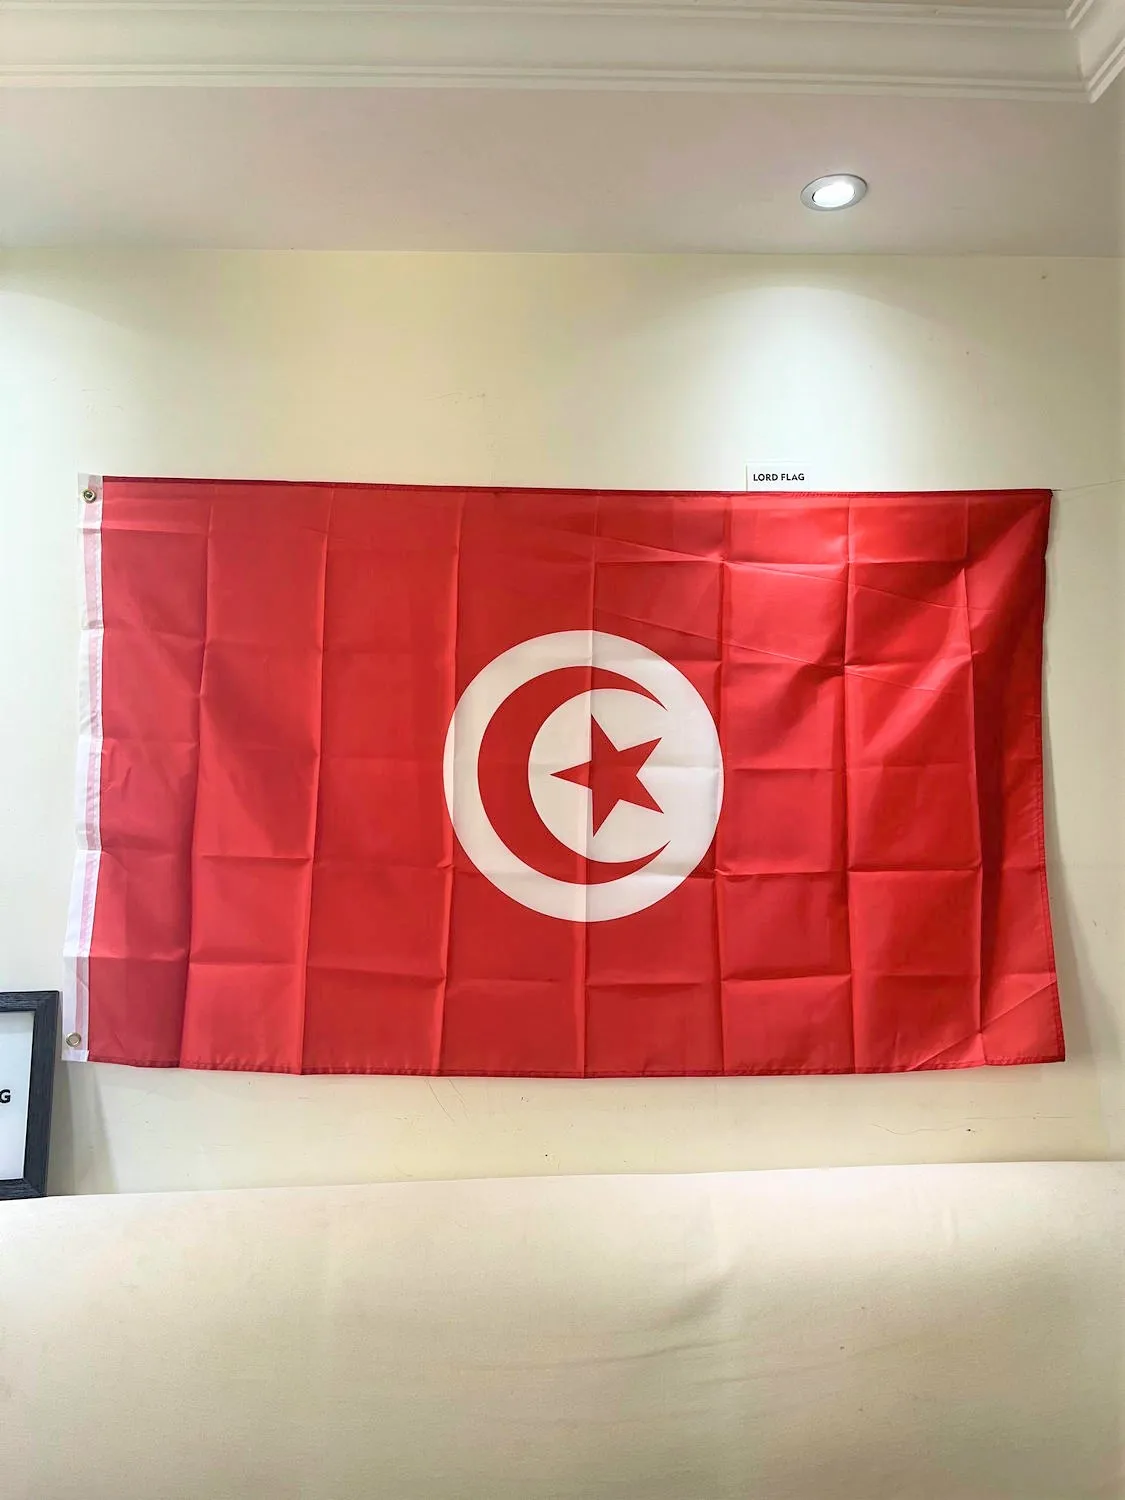 

Tunisia Tunisie TUN TN Flag 90X150cm 3x5FT Polyester A Red Star And Crescent Tunisian National Flags For Decoration